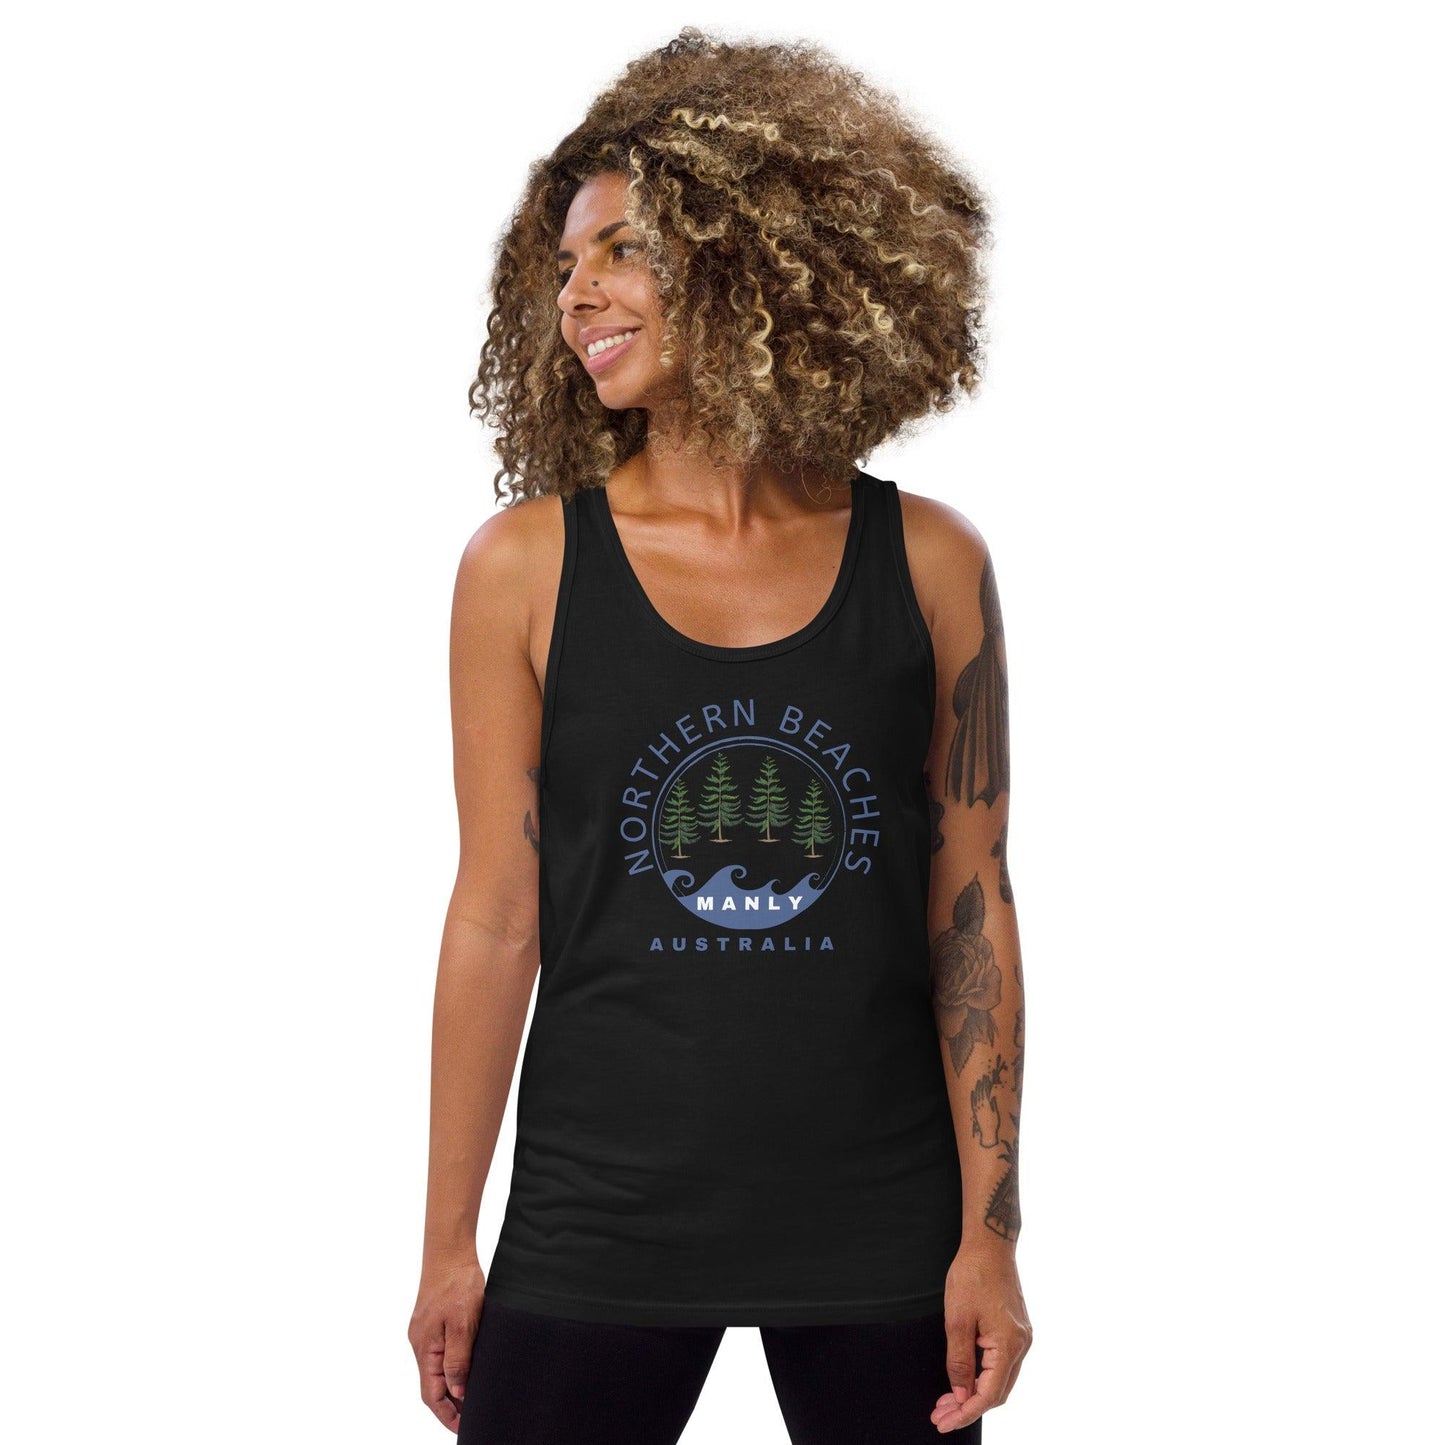 Cotton Tank Top with Northern Beaches logo design - Lost Manly Shop